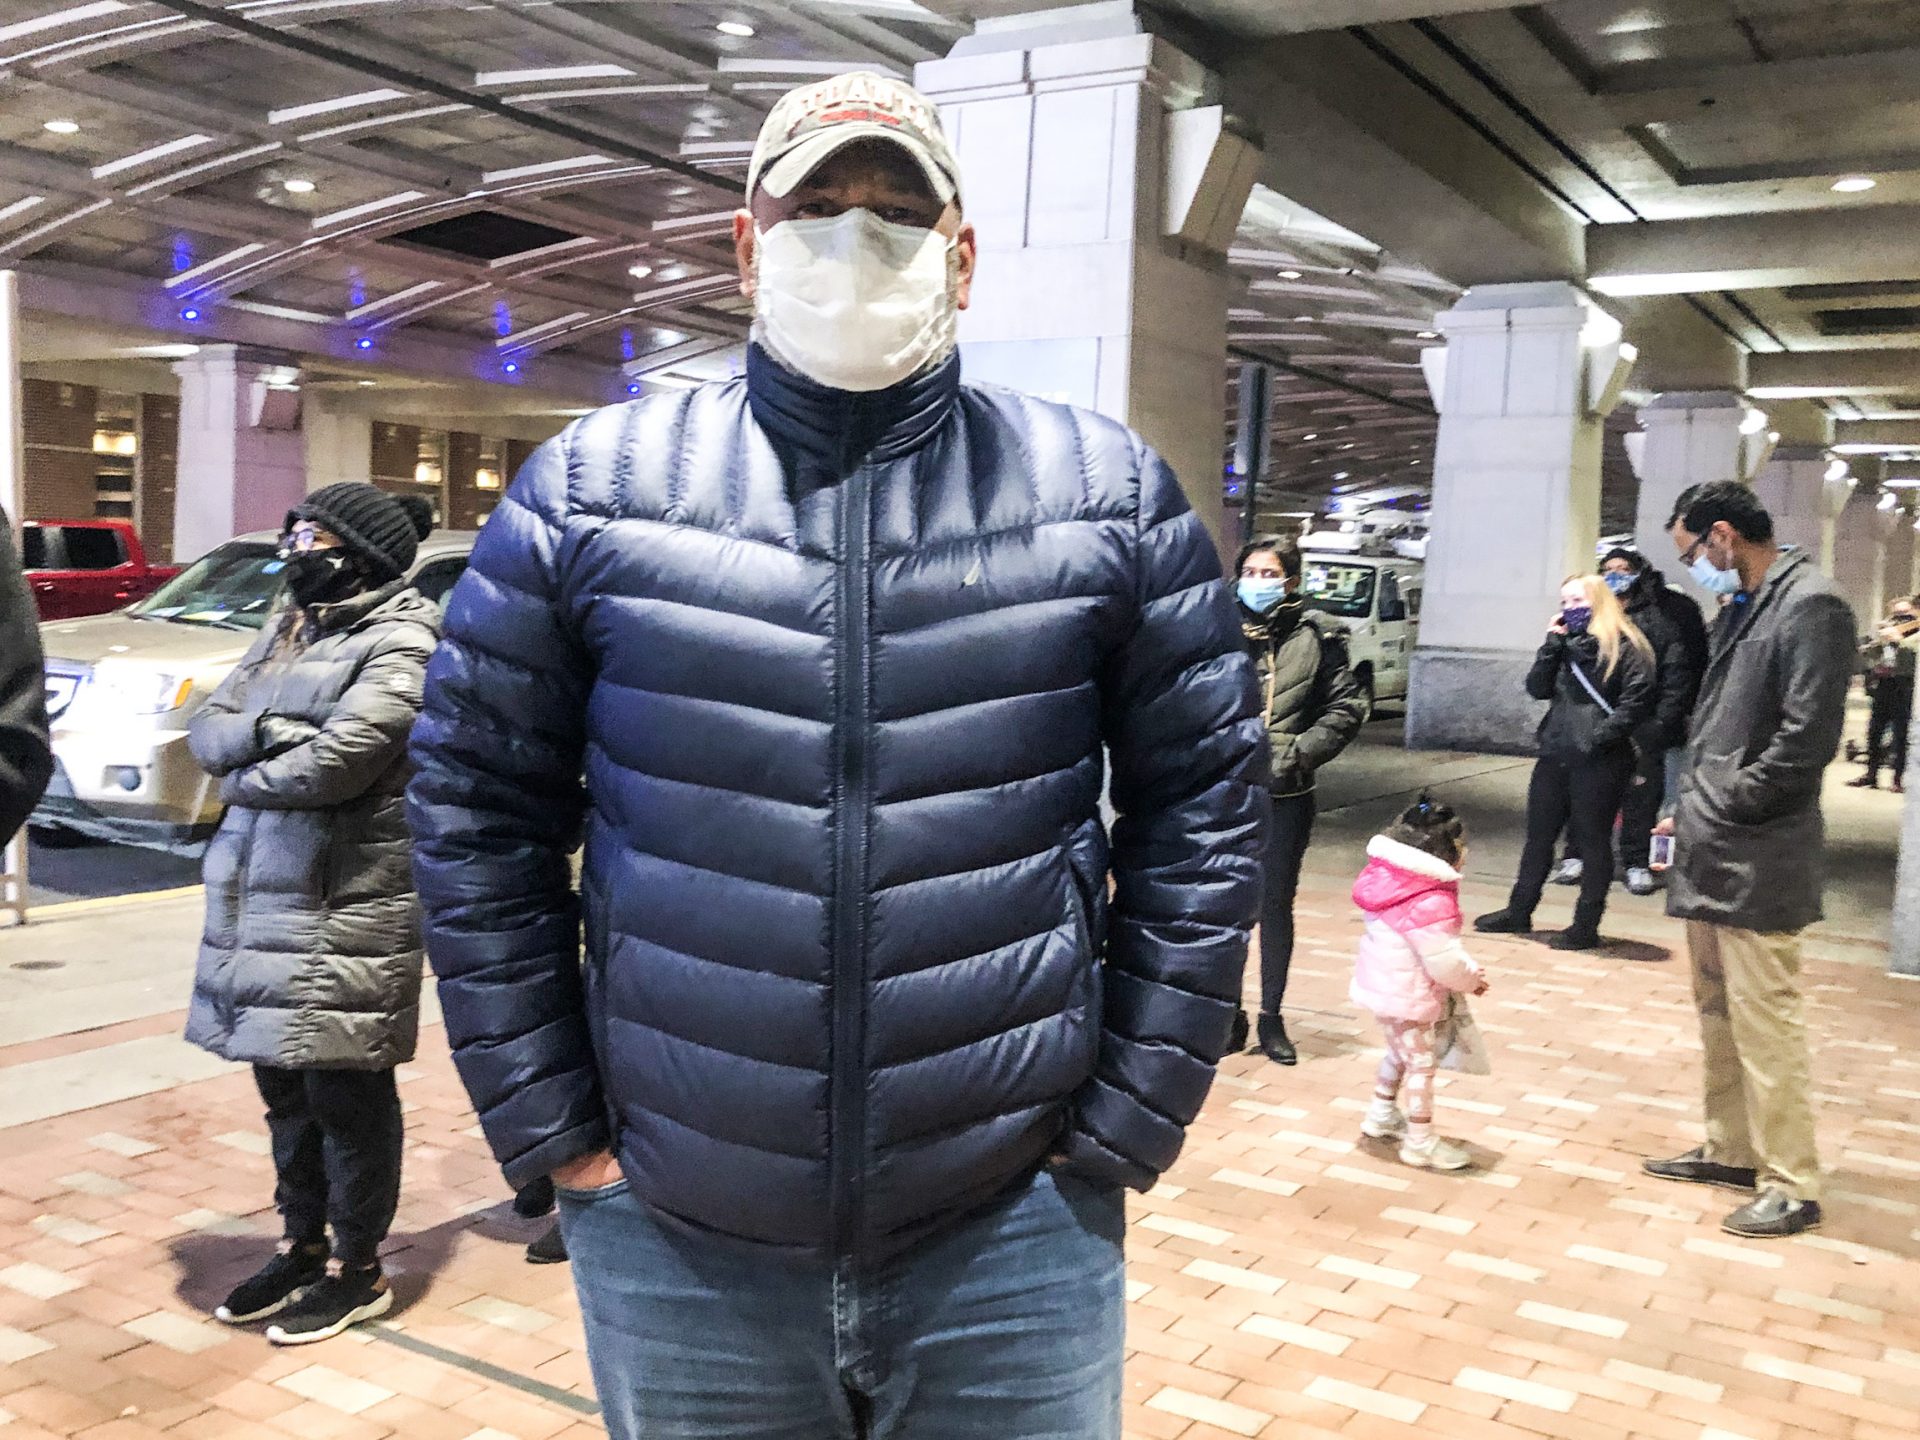 Julio Polanco, a behavioral care specialist at Children’s Crisis Treatment Center, stands in line at Philadelphia’s community vaccination clinic at the Pennsylvania Convention Center.